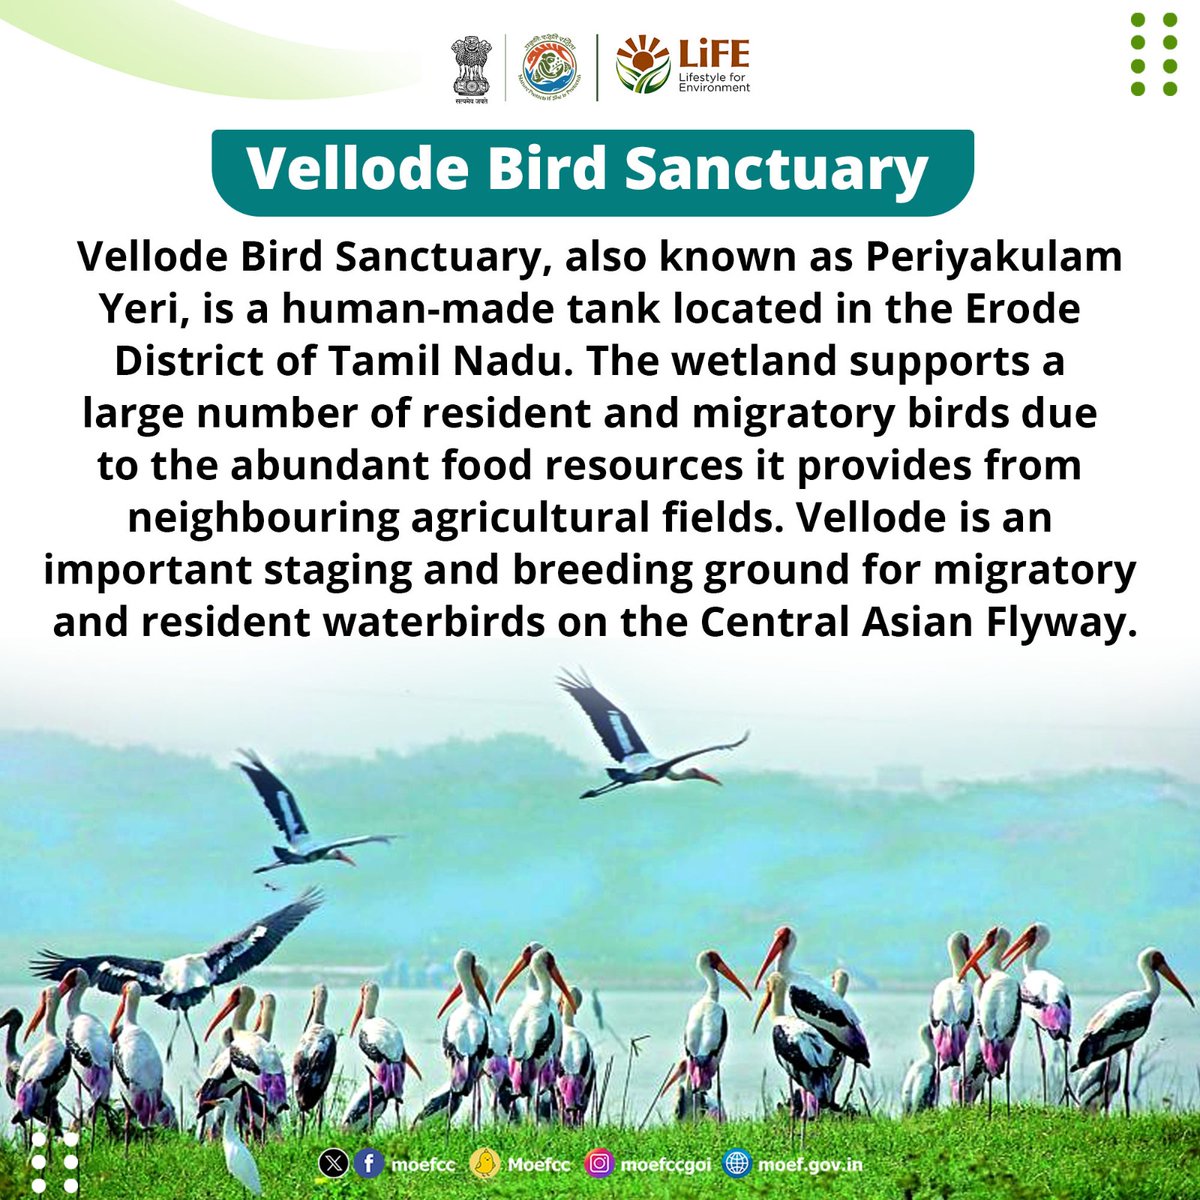 Discovering India's Ramsar Sites Day 75: Vellore Bird Sanctuary From wetlands to wildlife, each site is a unique haven for nature. Let's celebrate and safeguard these vital ecosystems together! #RamsarSites #MissionLiFE #ProPlanetPeople